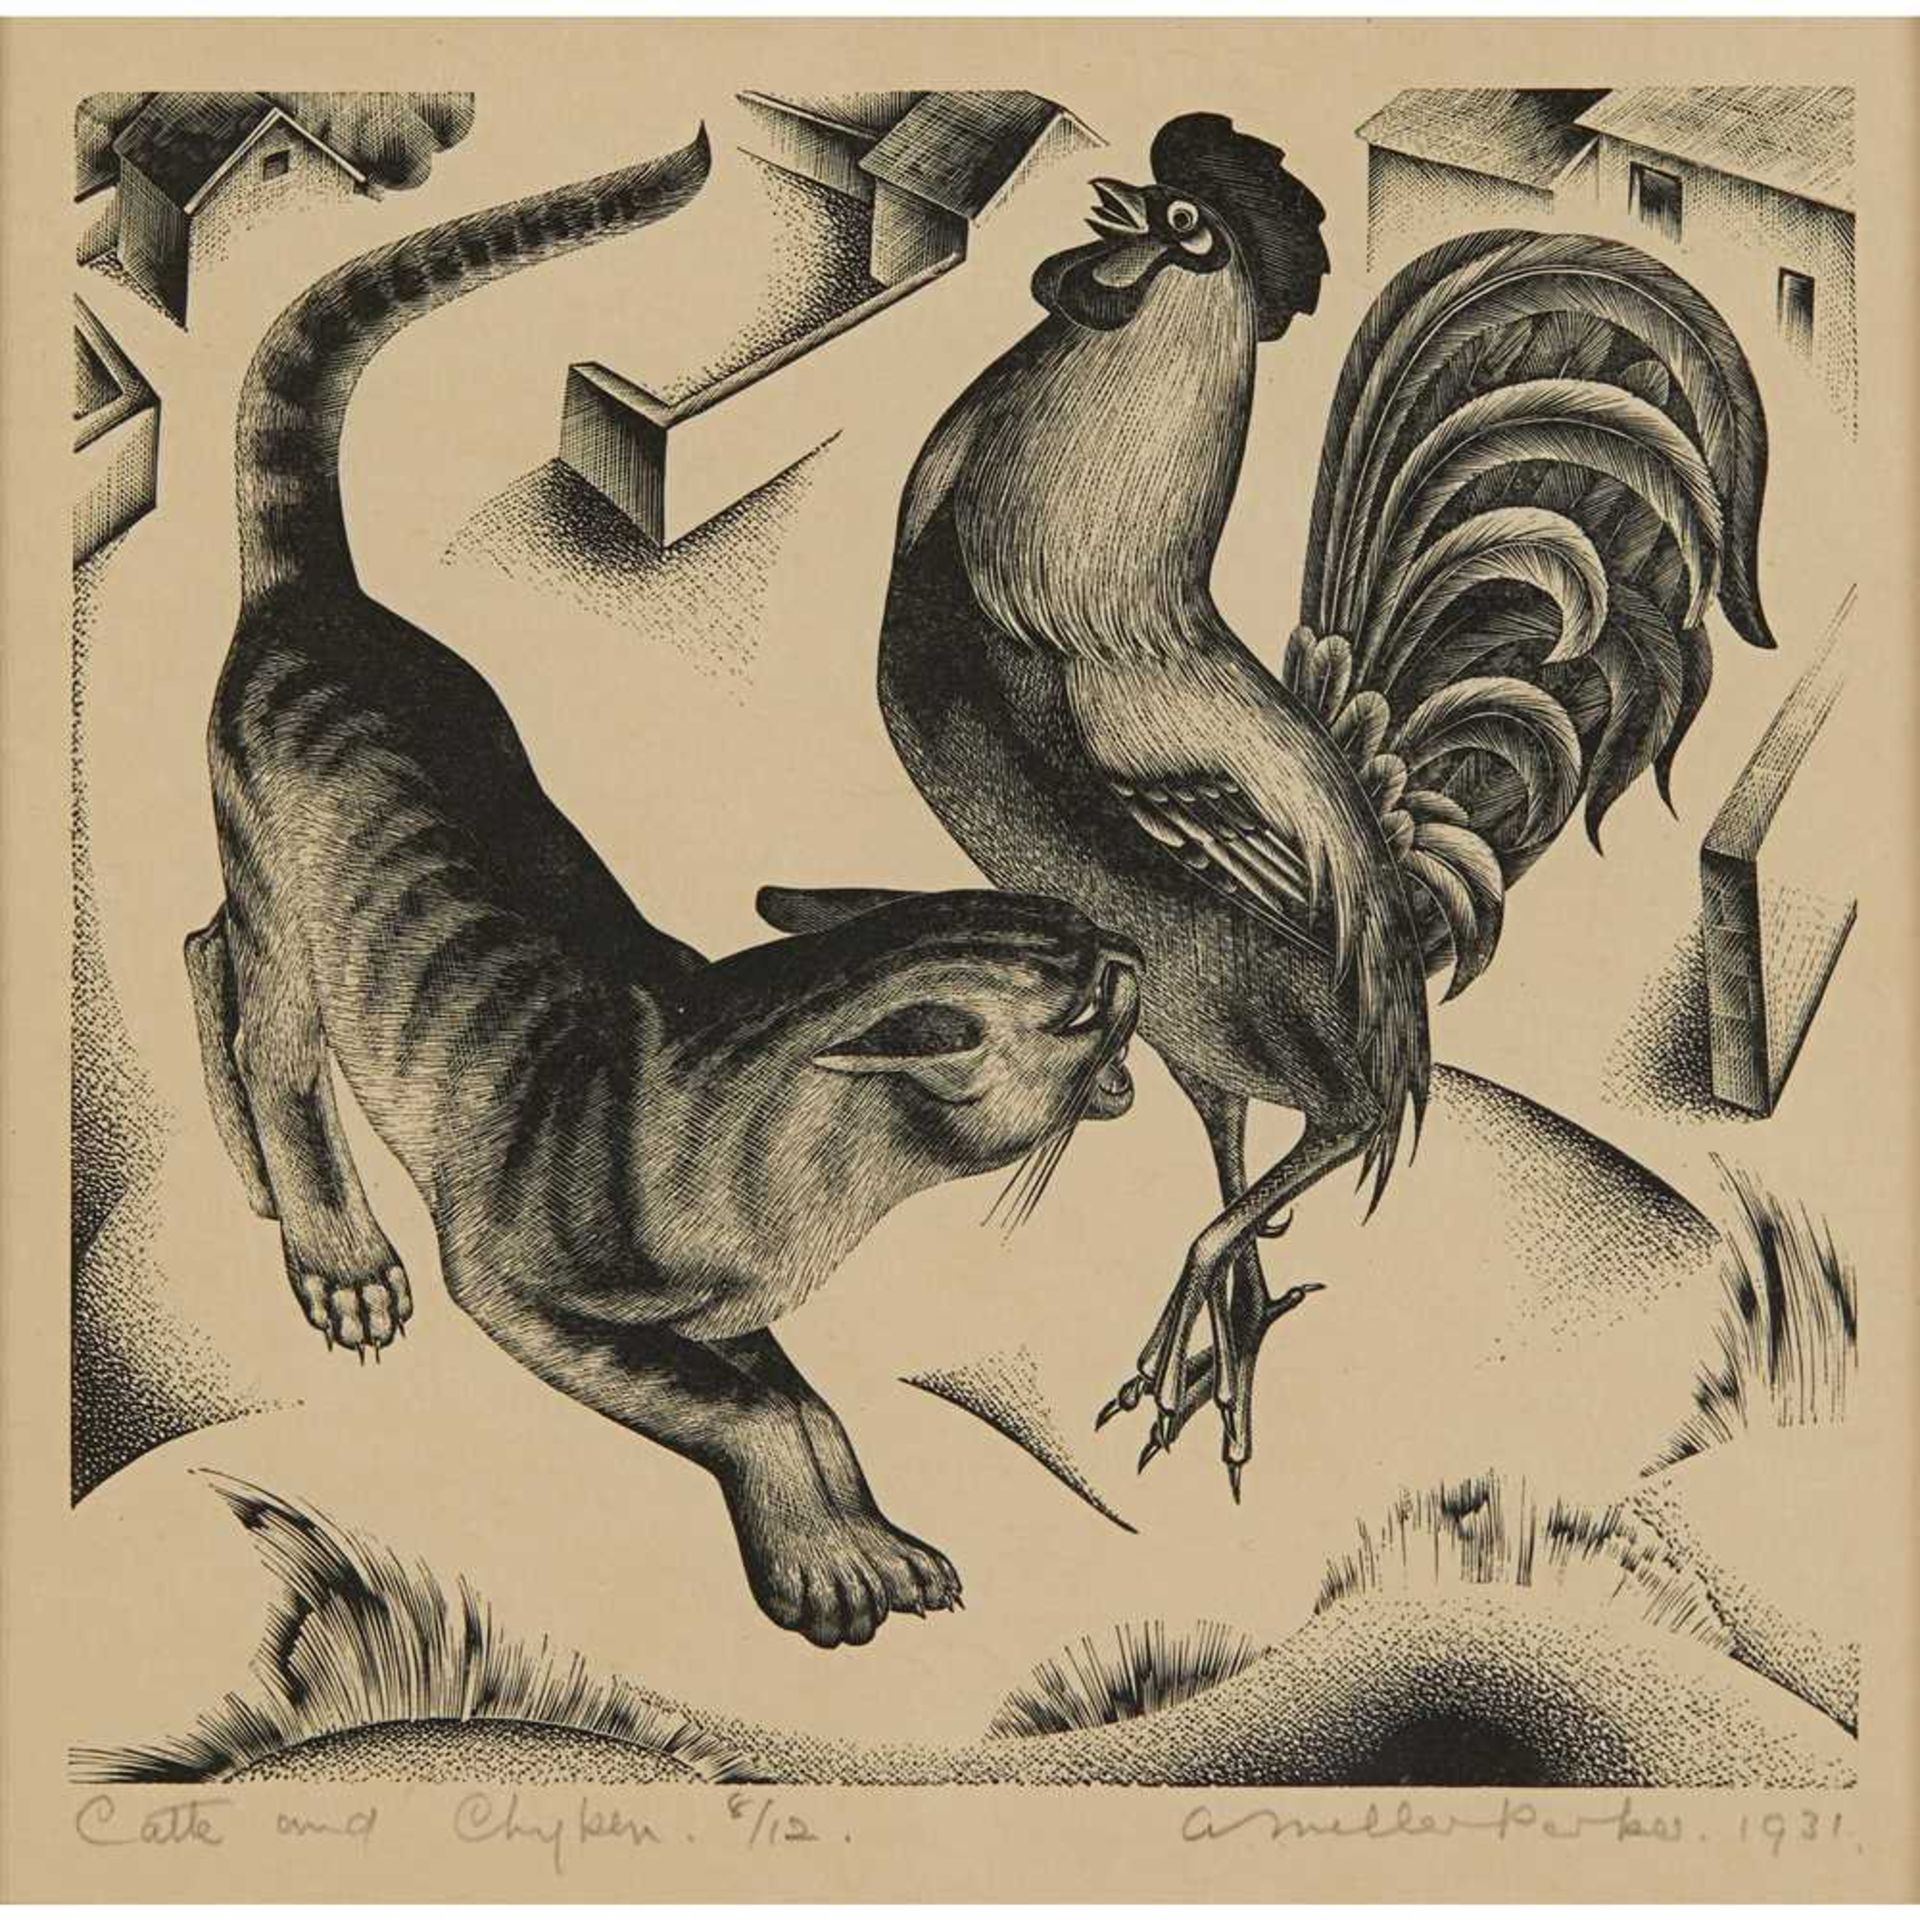 § AGNES MILLER PARKER (SCOTTISH 1895-1980) CATTE AND CHYKEN (FOR 'THE FABLES OF ESOPE') Signed and